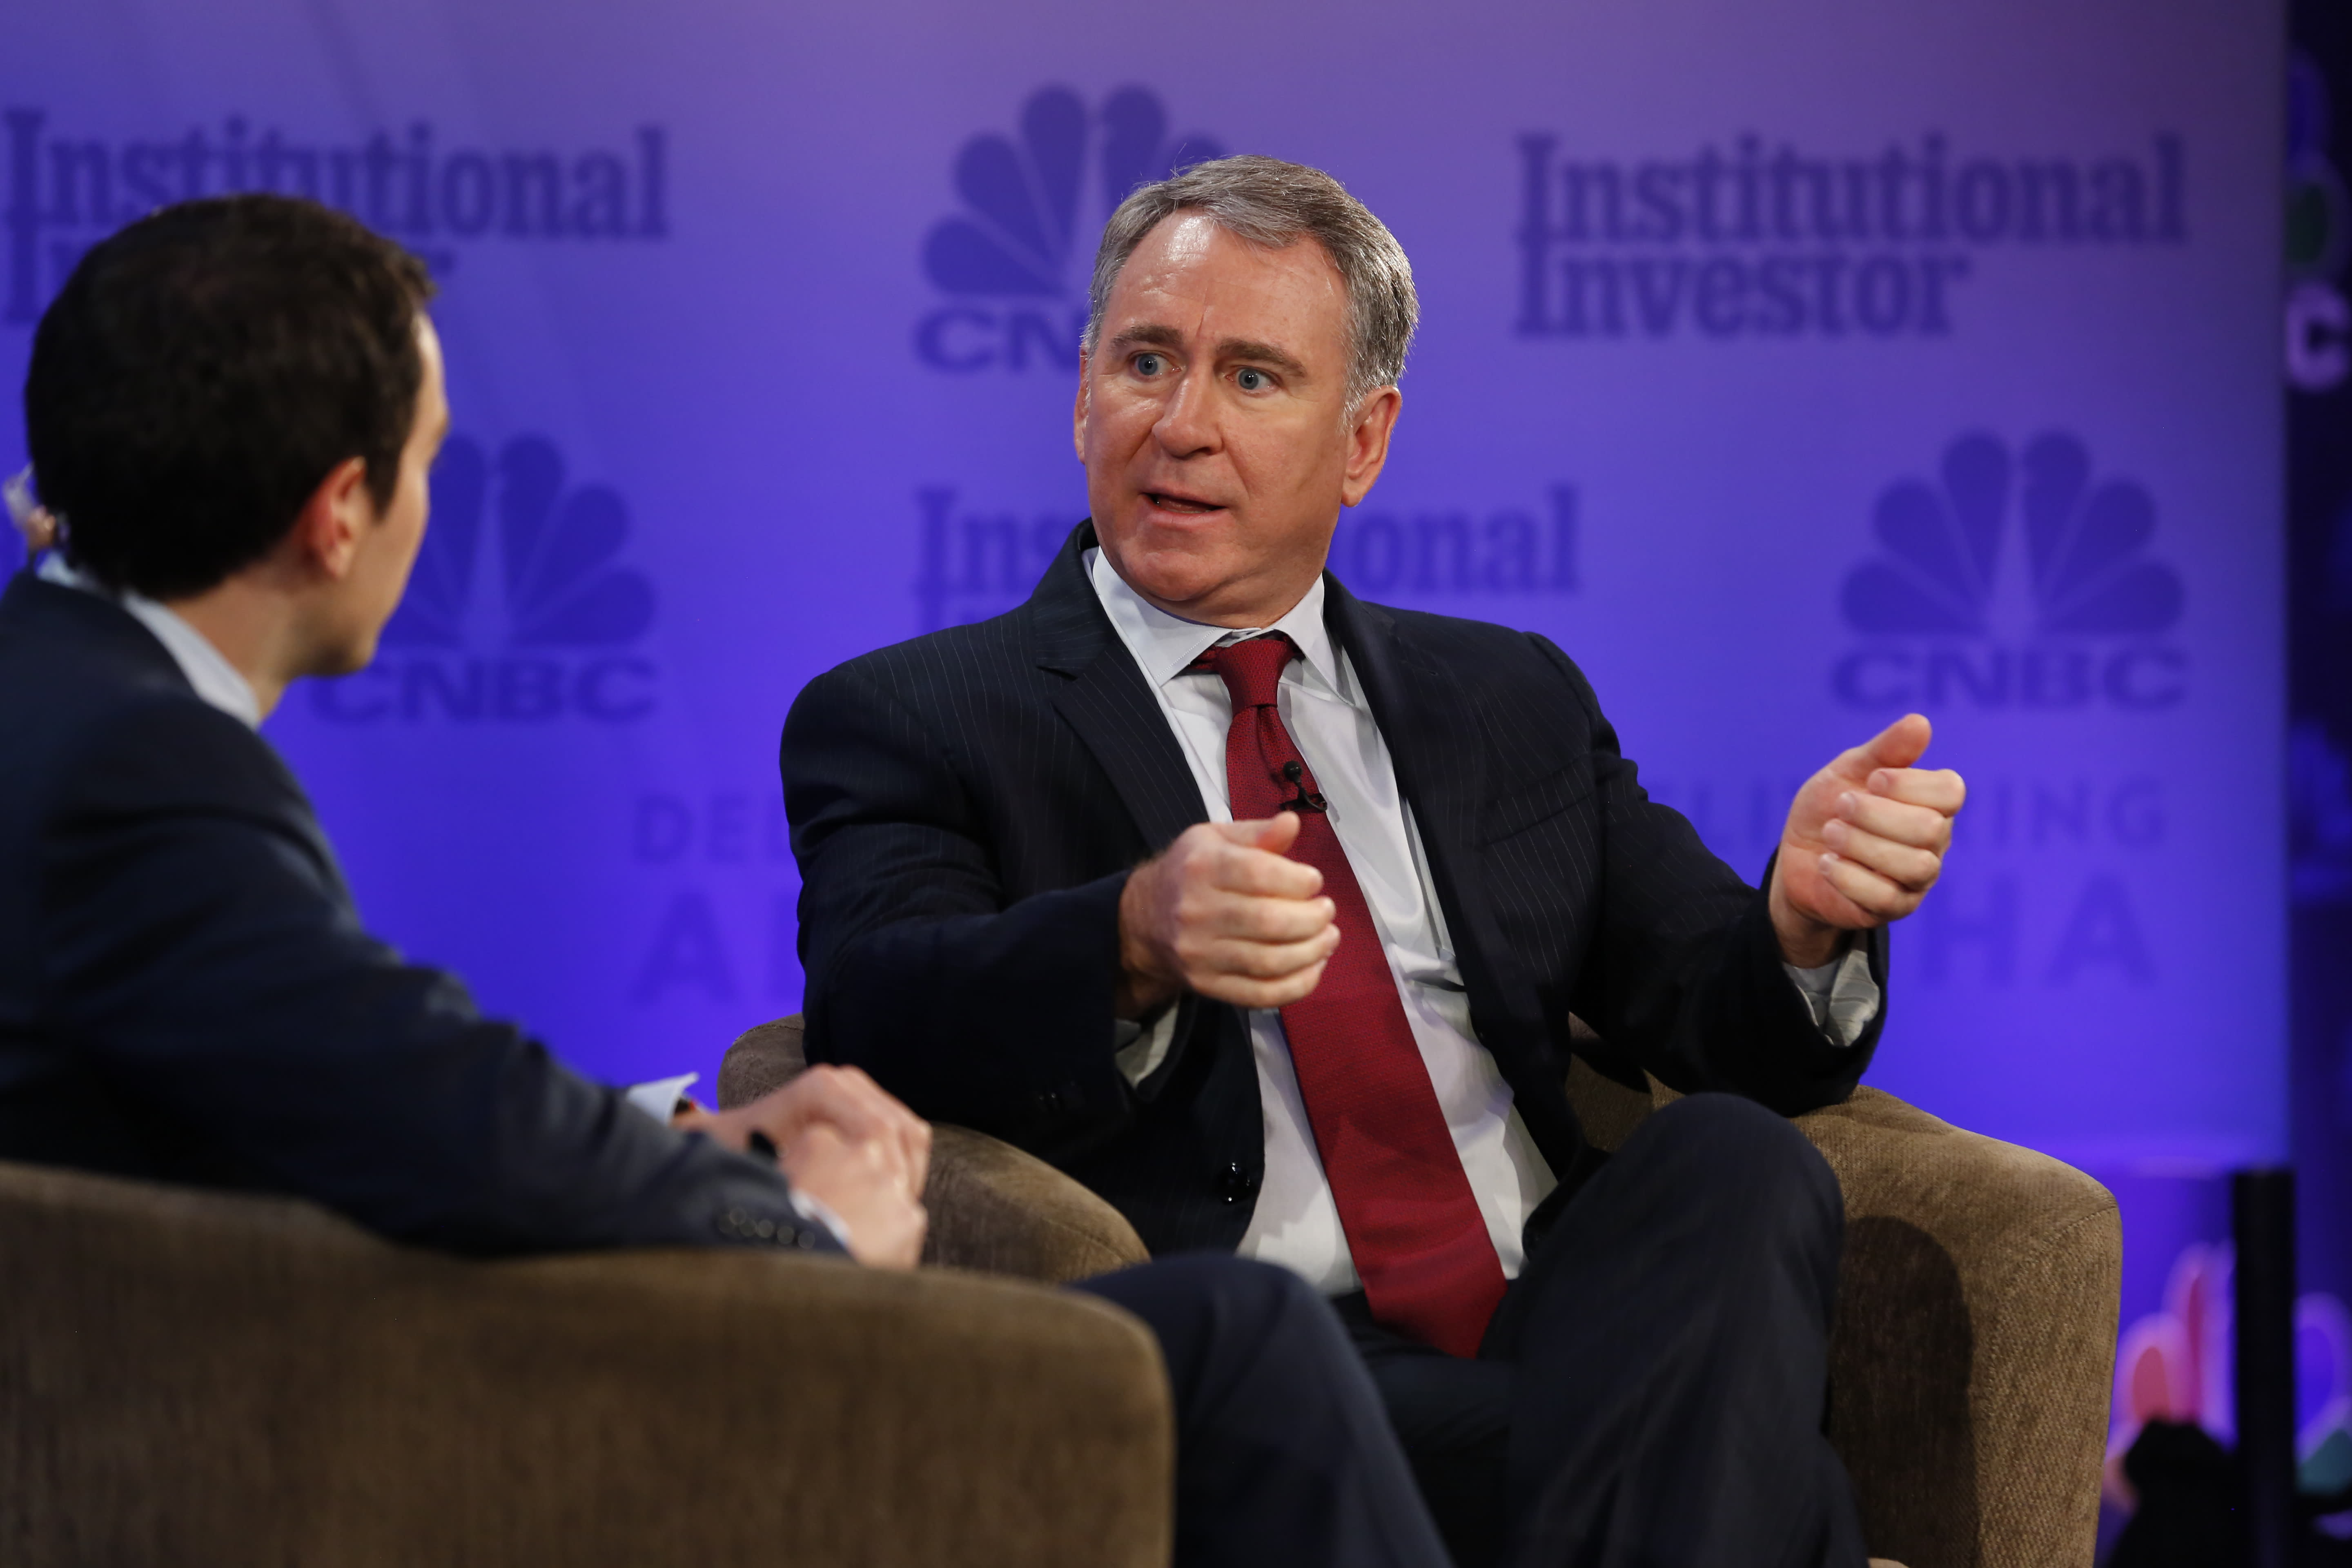 City billionaire Ken Griffin defends Melvin’s stakes against “crazy” theory